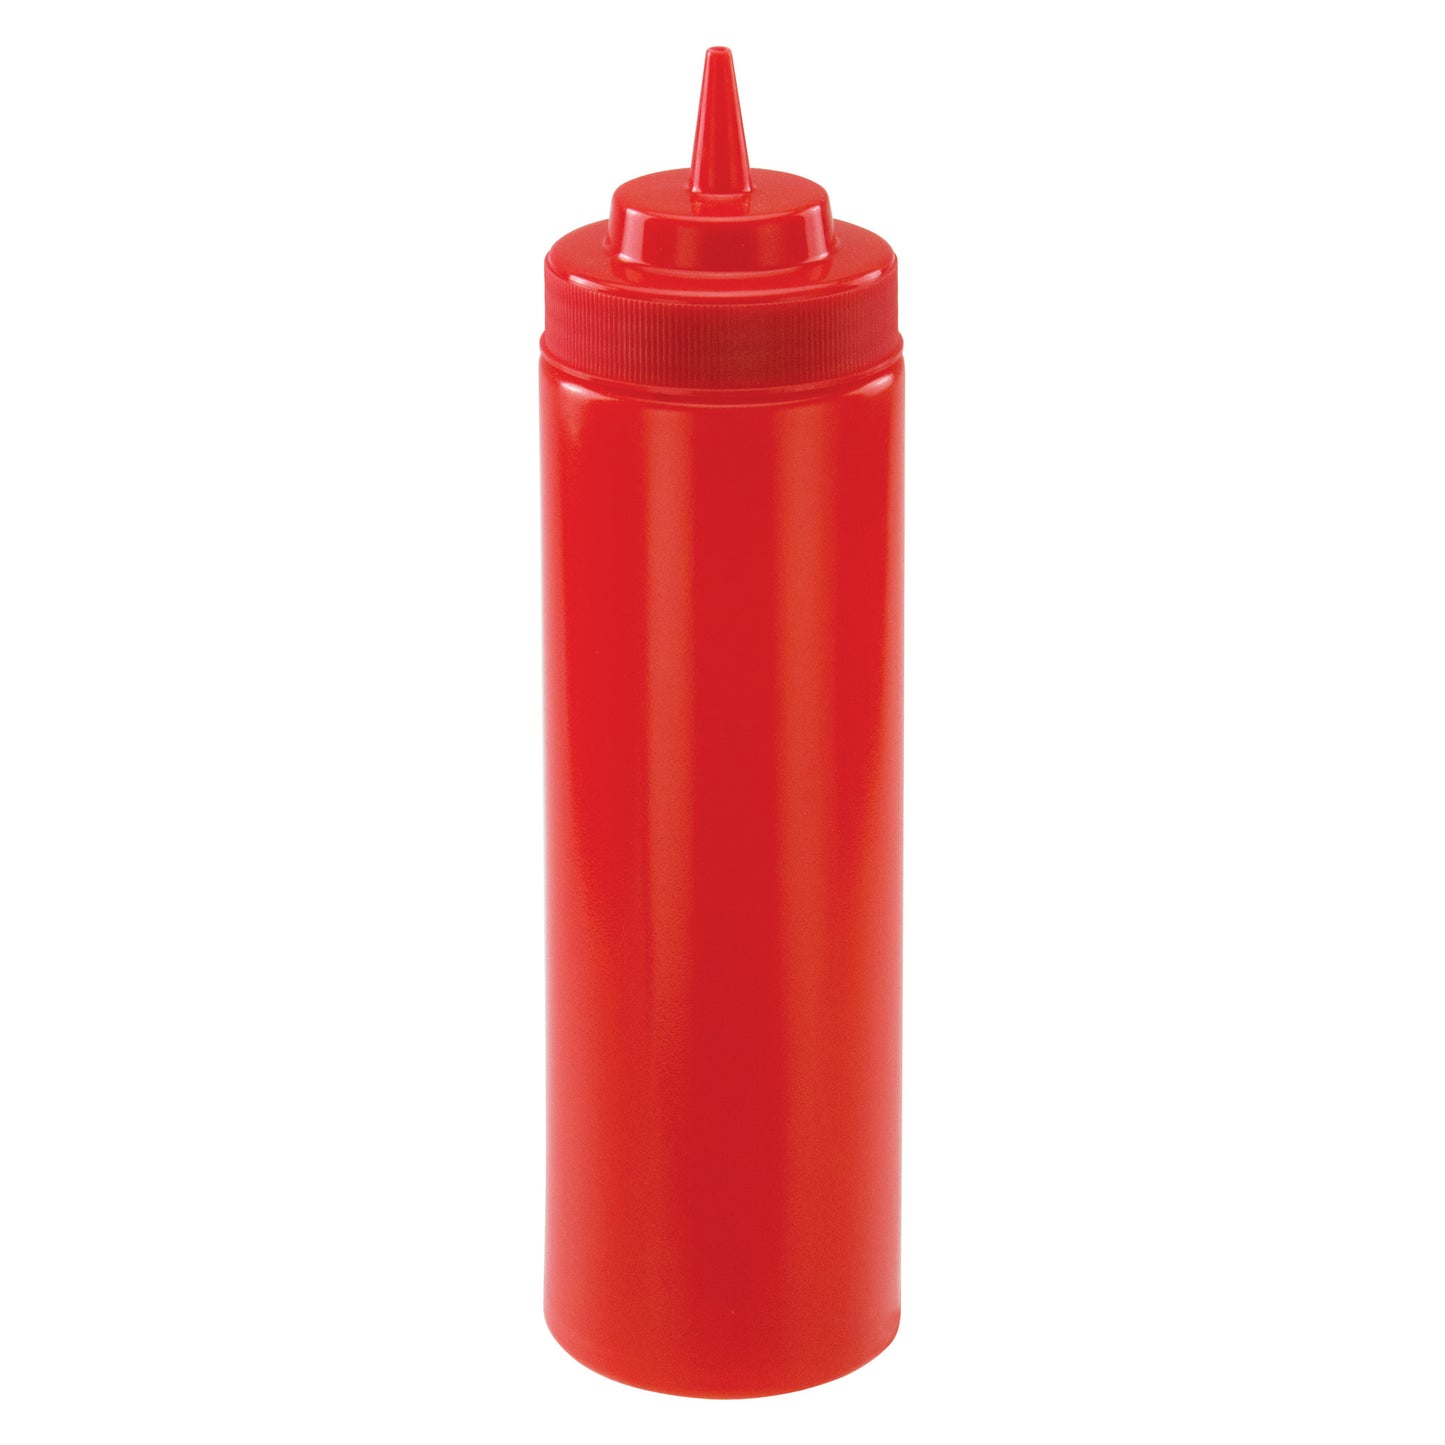 PSW-24R - 24oz Wide-Mouth Squeeze Bottles - Red